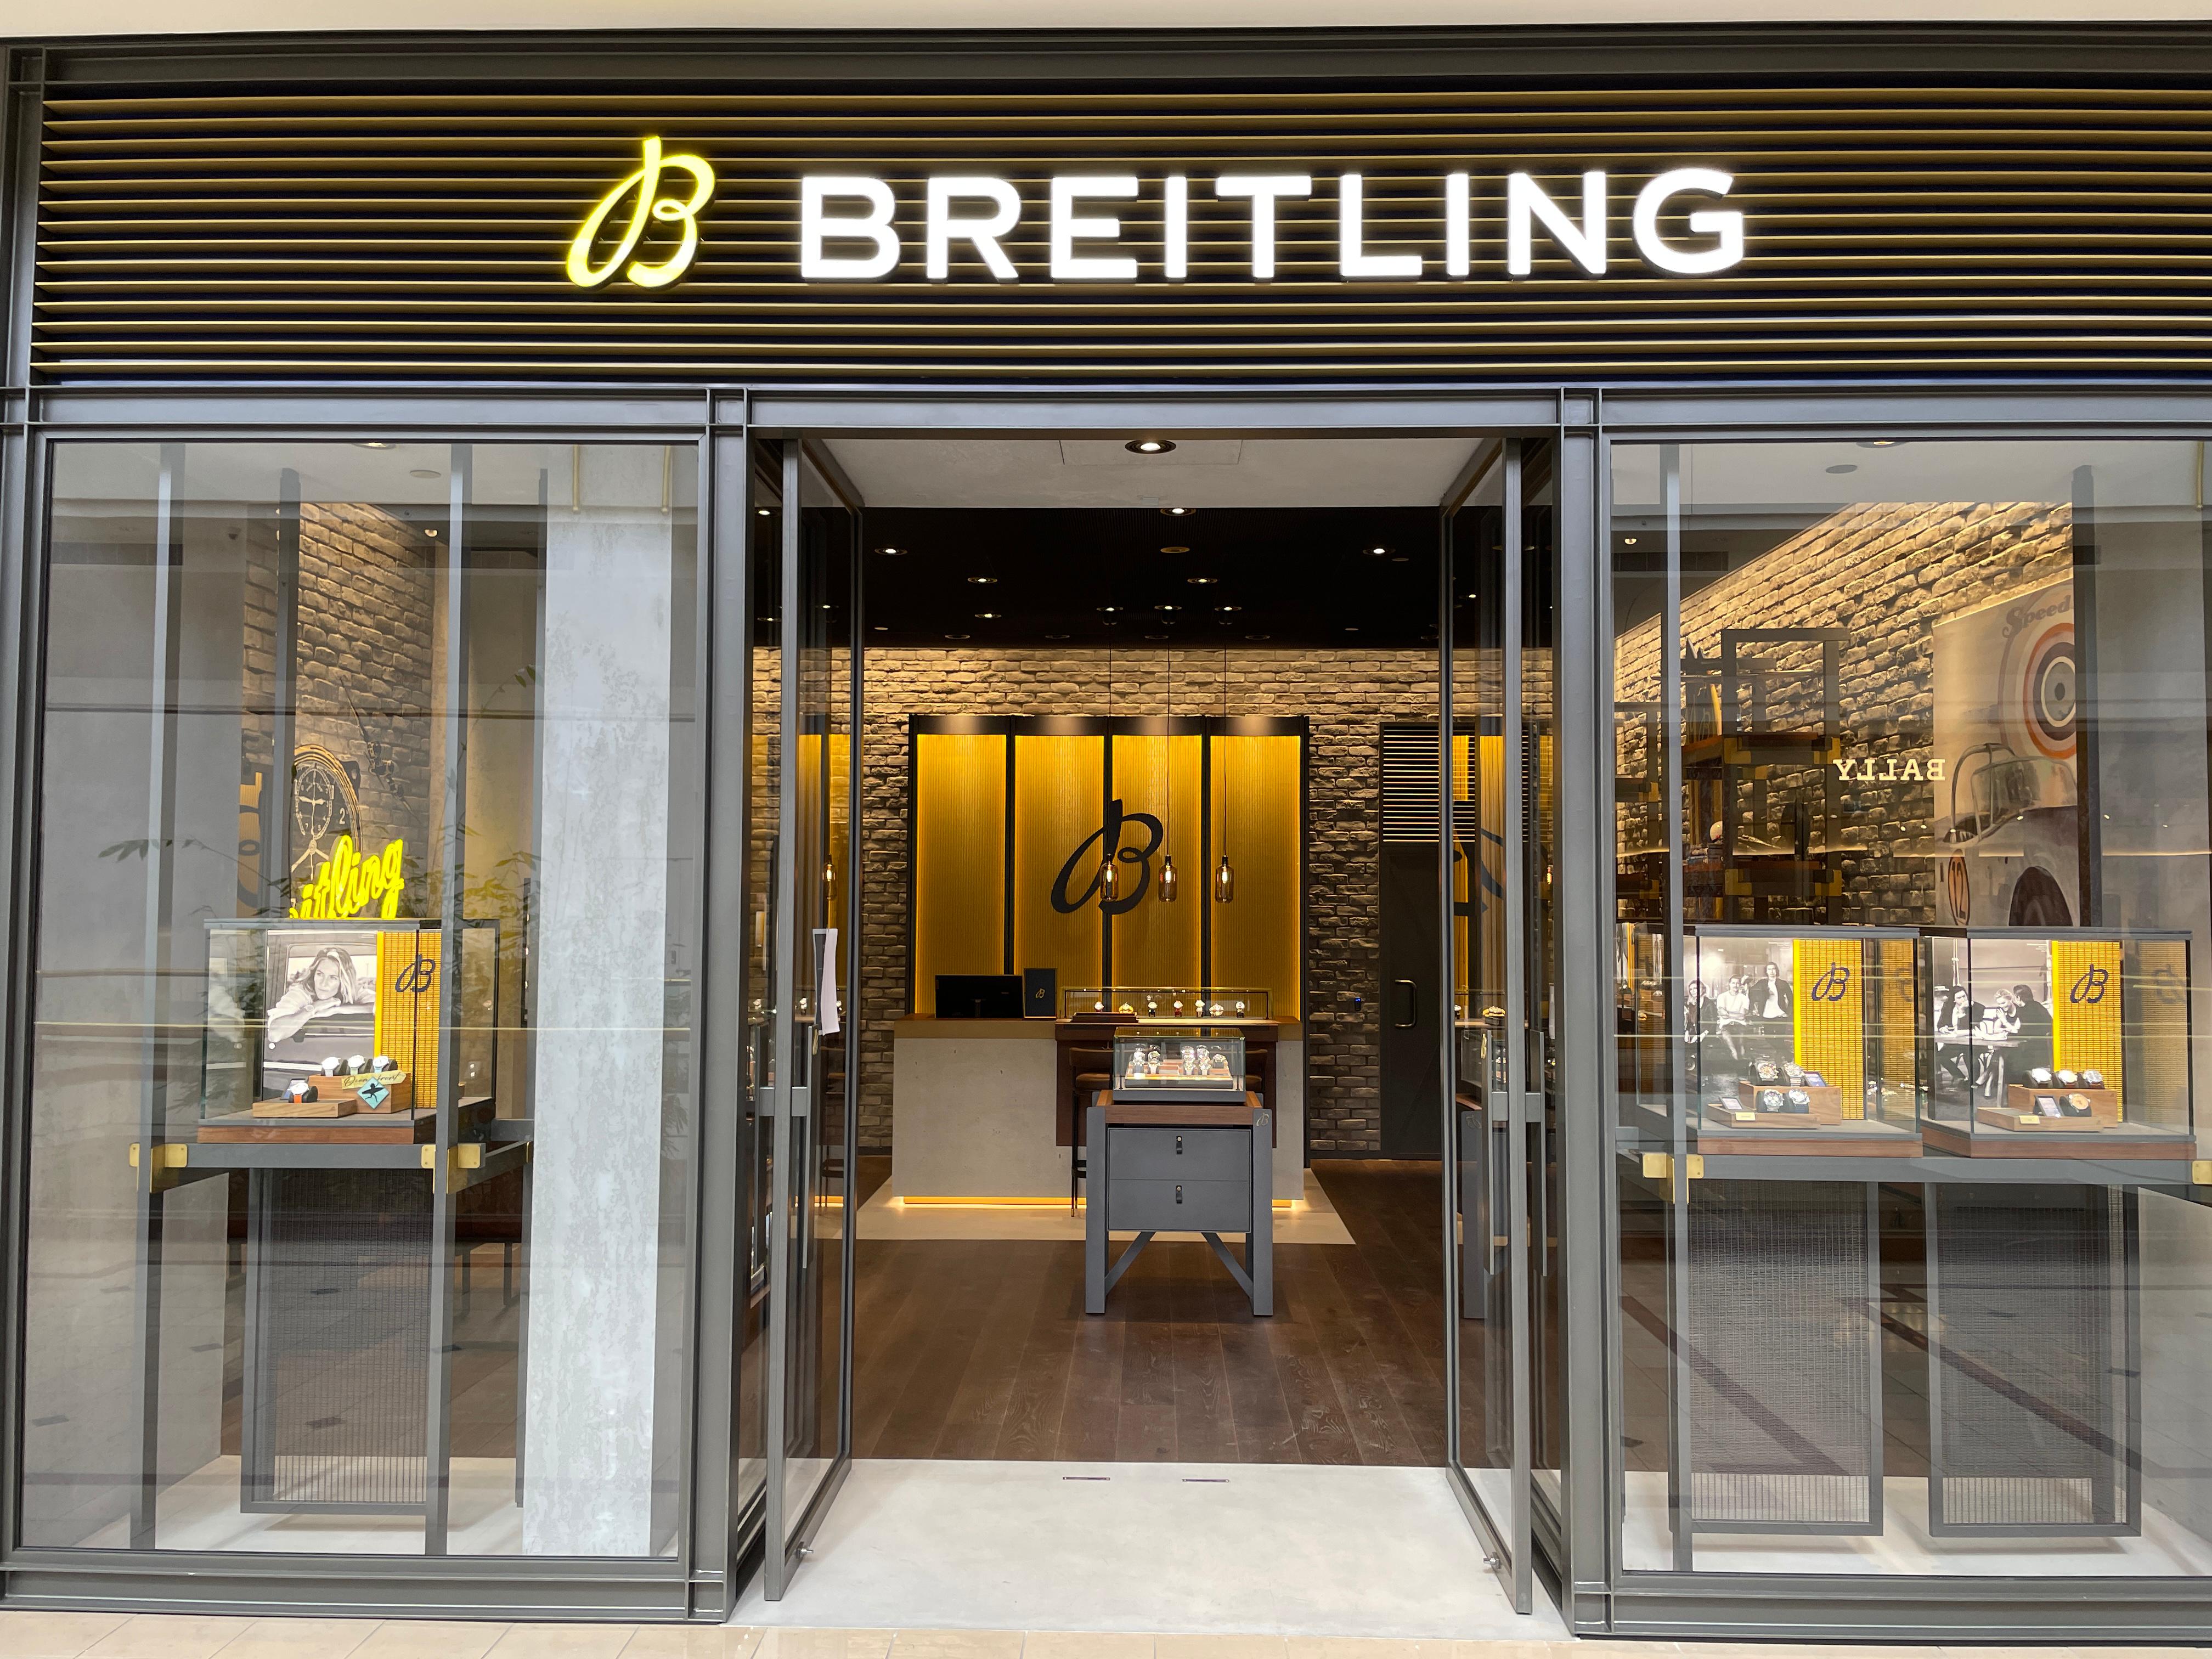 BREITLING BOUTIQUE CHADSTONE Chadstone (03) 9563 3501